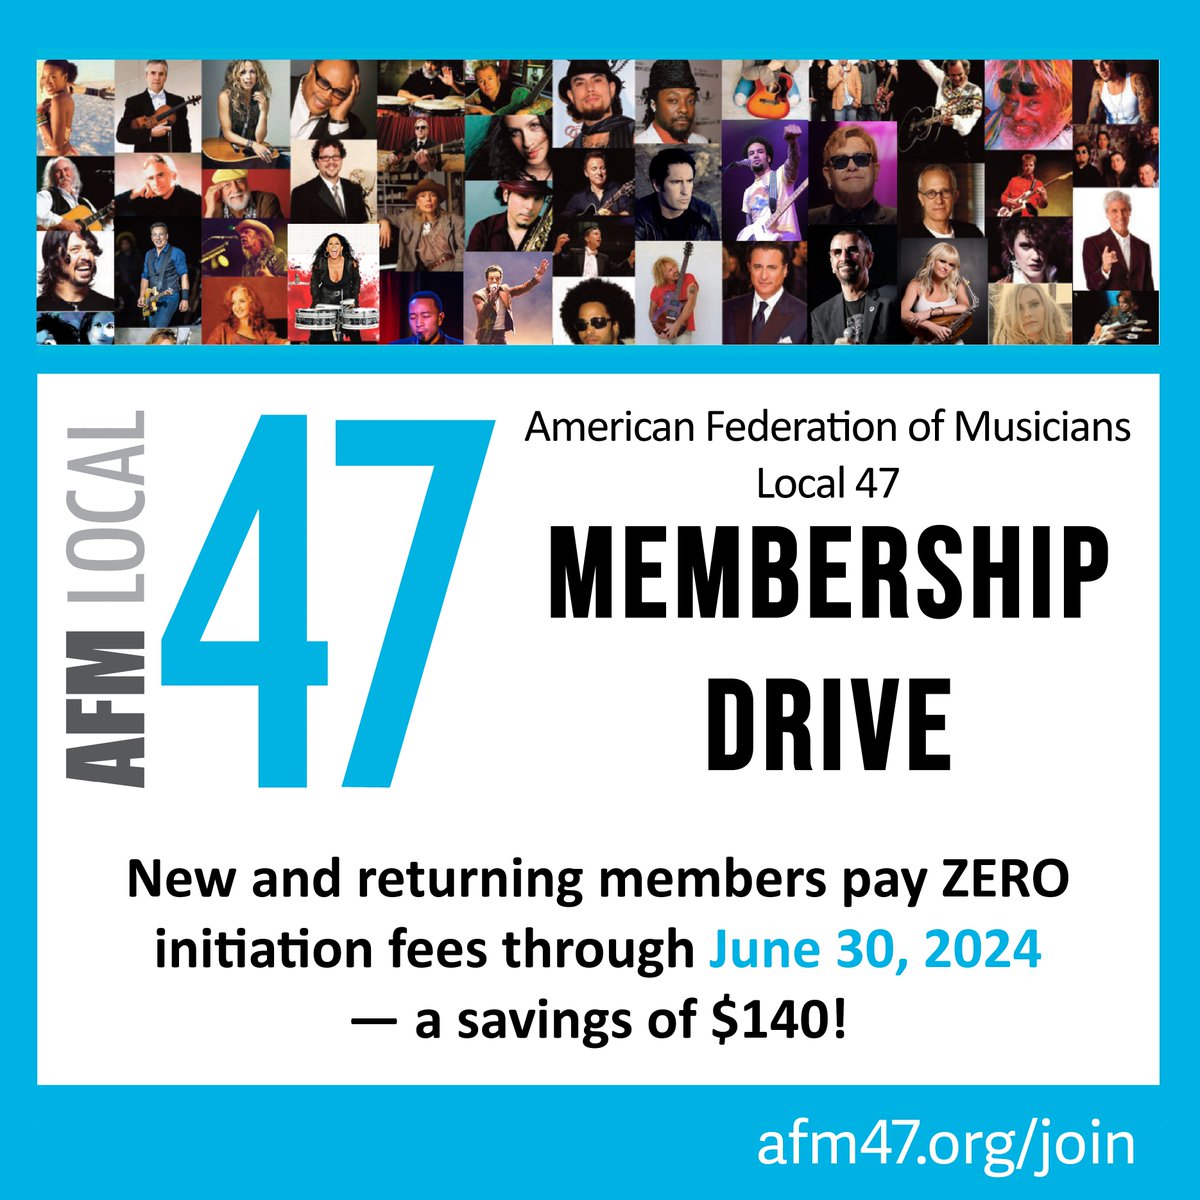 📢Announcing our #AFM47 Spring Membership Drive 📢 It pays to be #UnionStrong. Learn more & join @ afm47.org/join